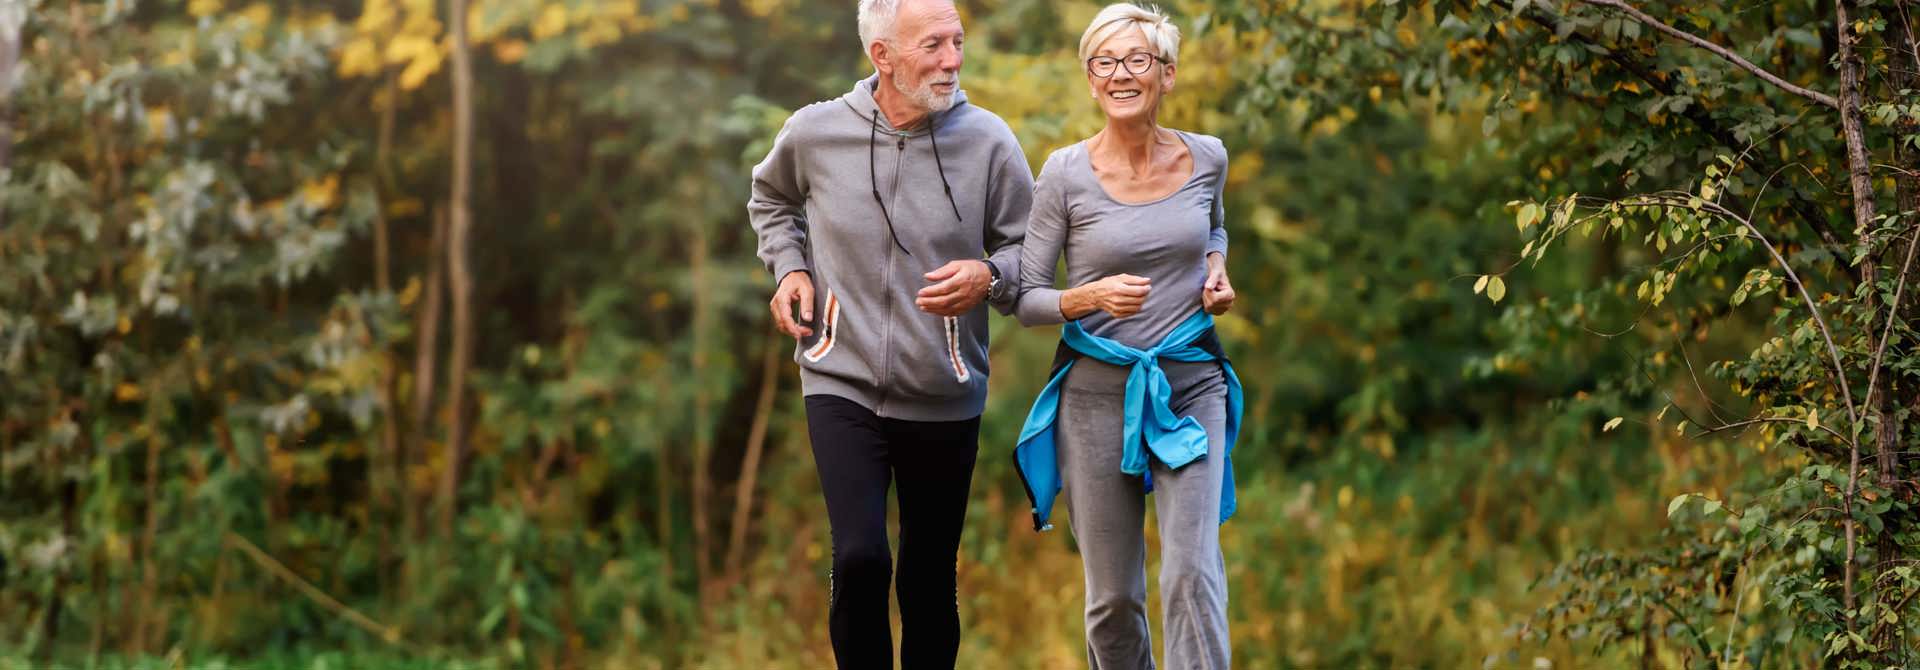 Regular Exercise Can Reduce Your Risk Of Developing Bowel Cancer